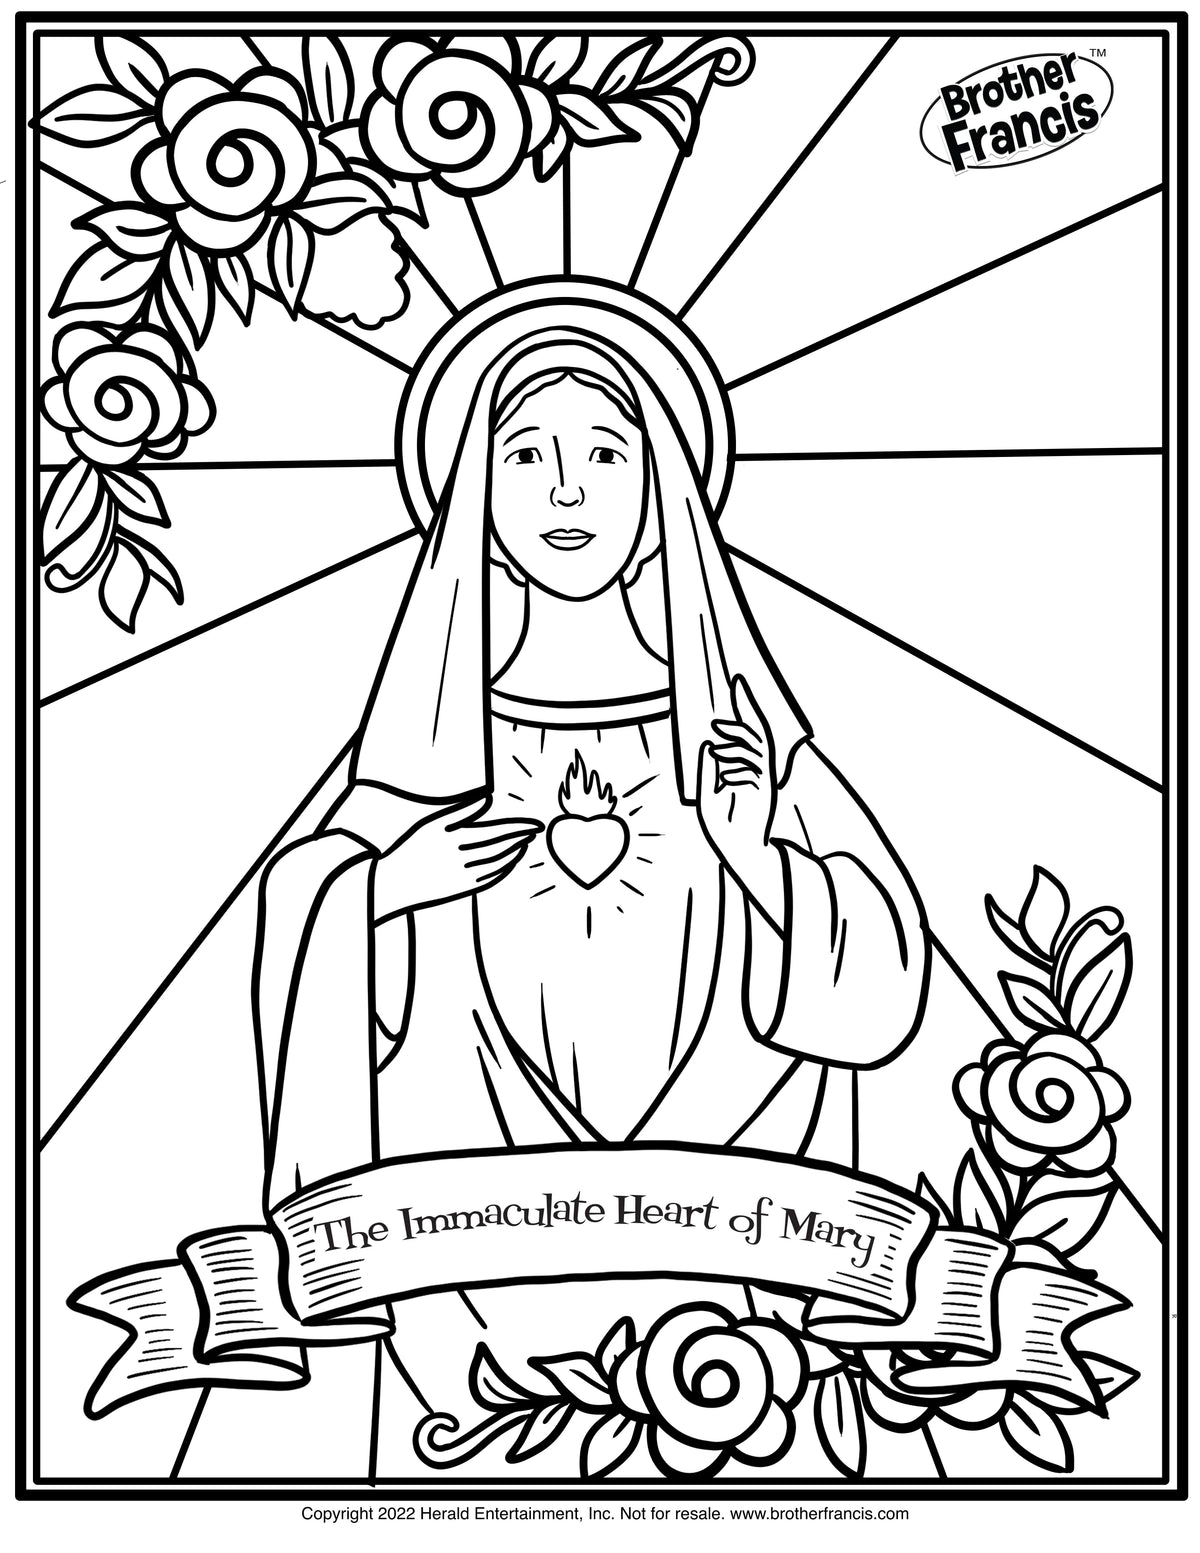 Download and Print - Immaculate Heart of Mary